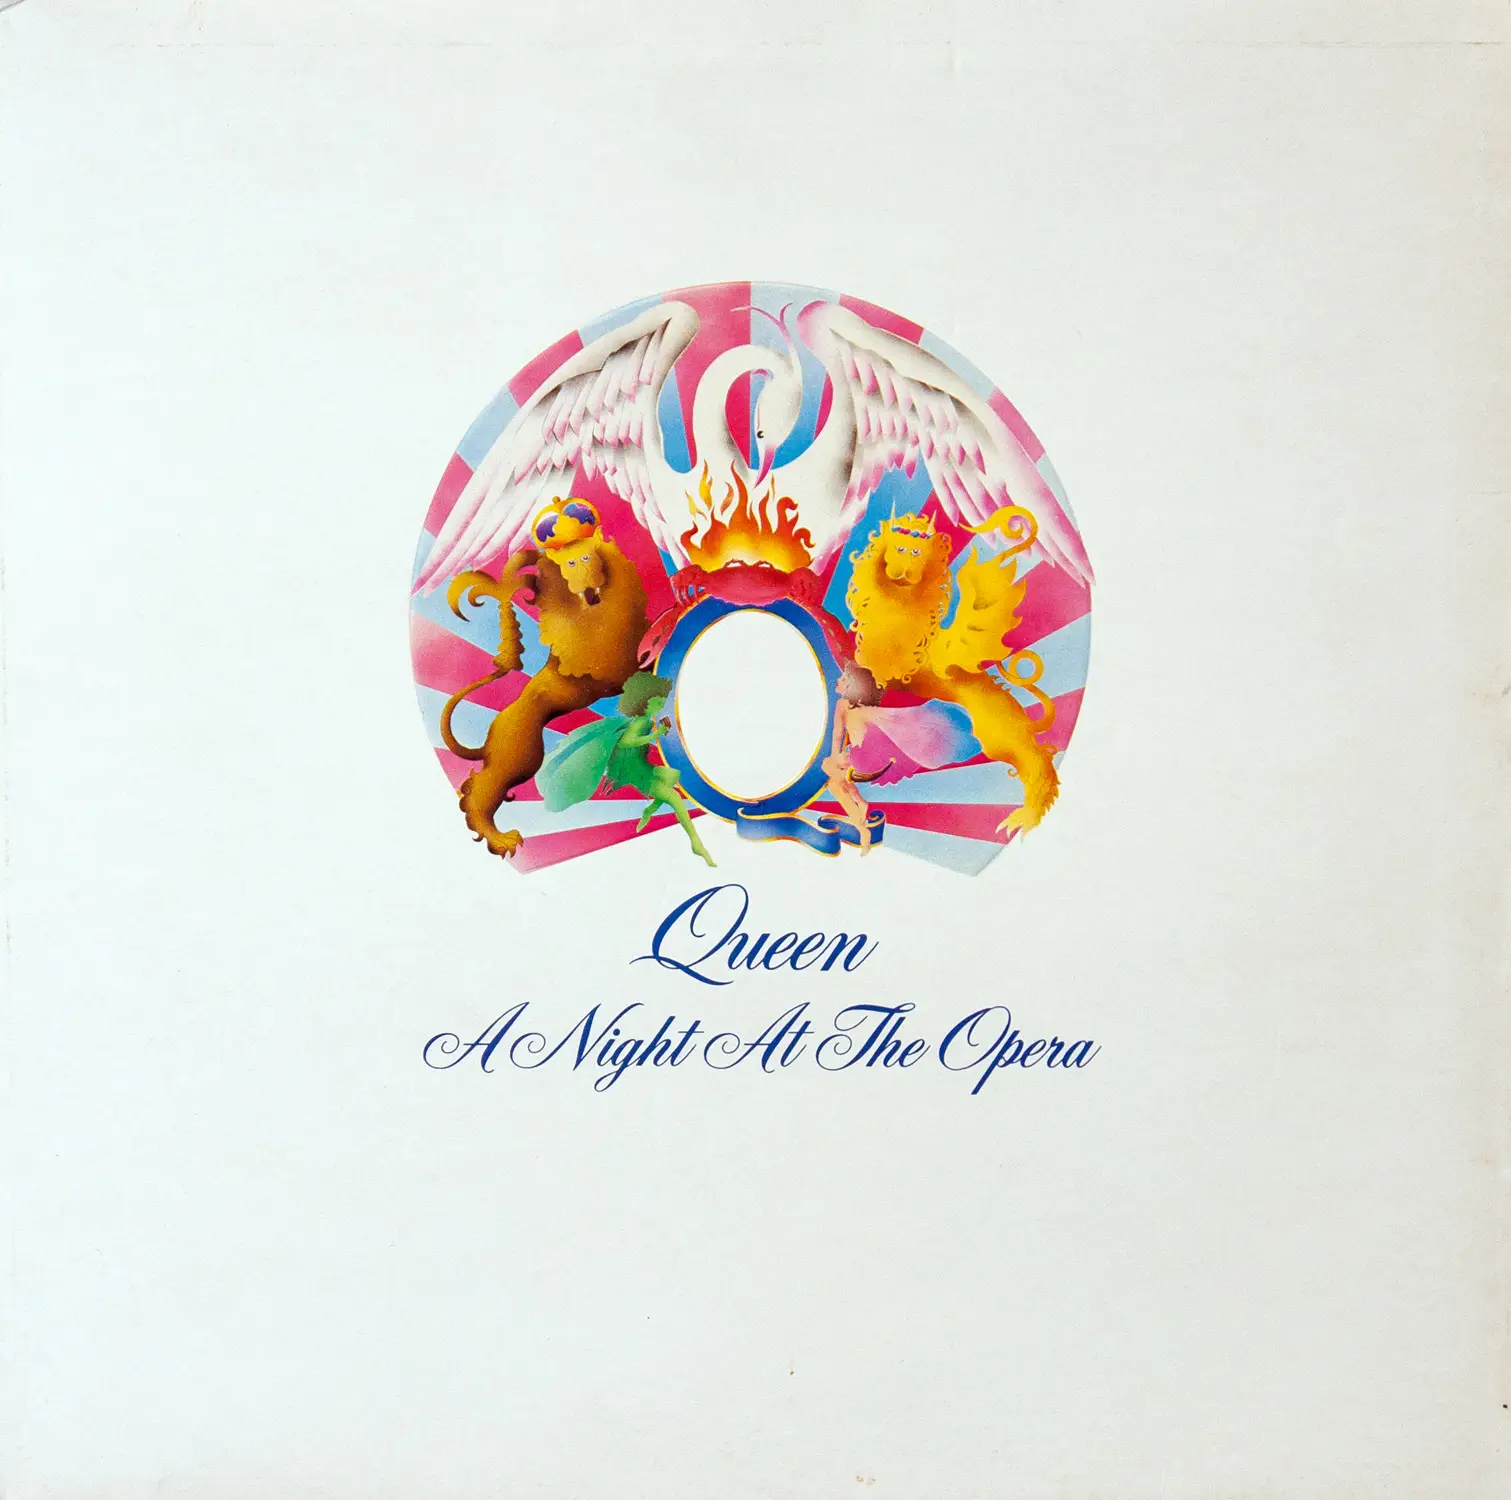 queen a night at the opera colored vinyl